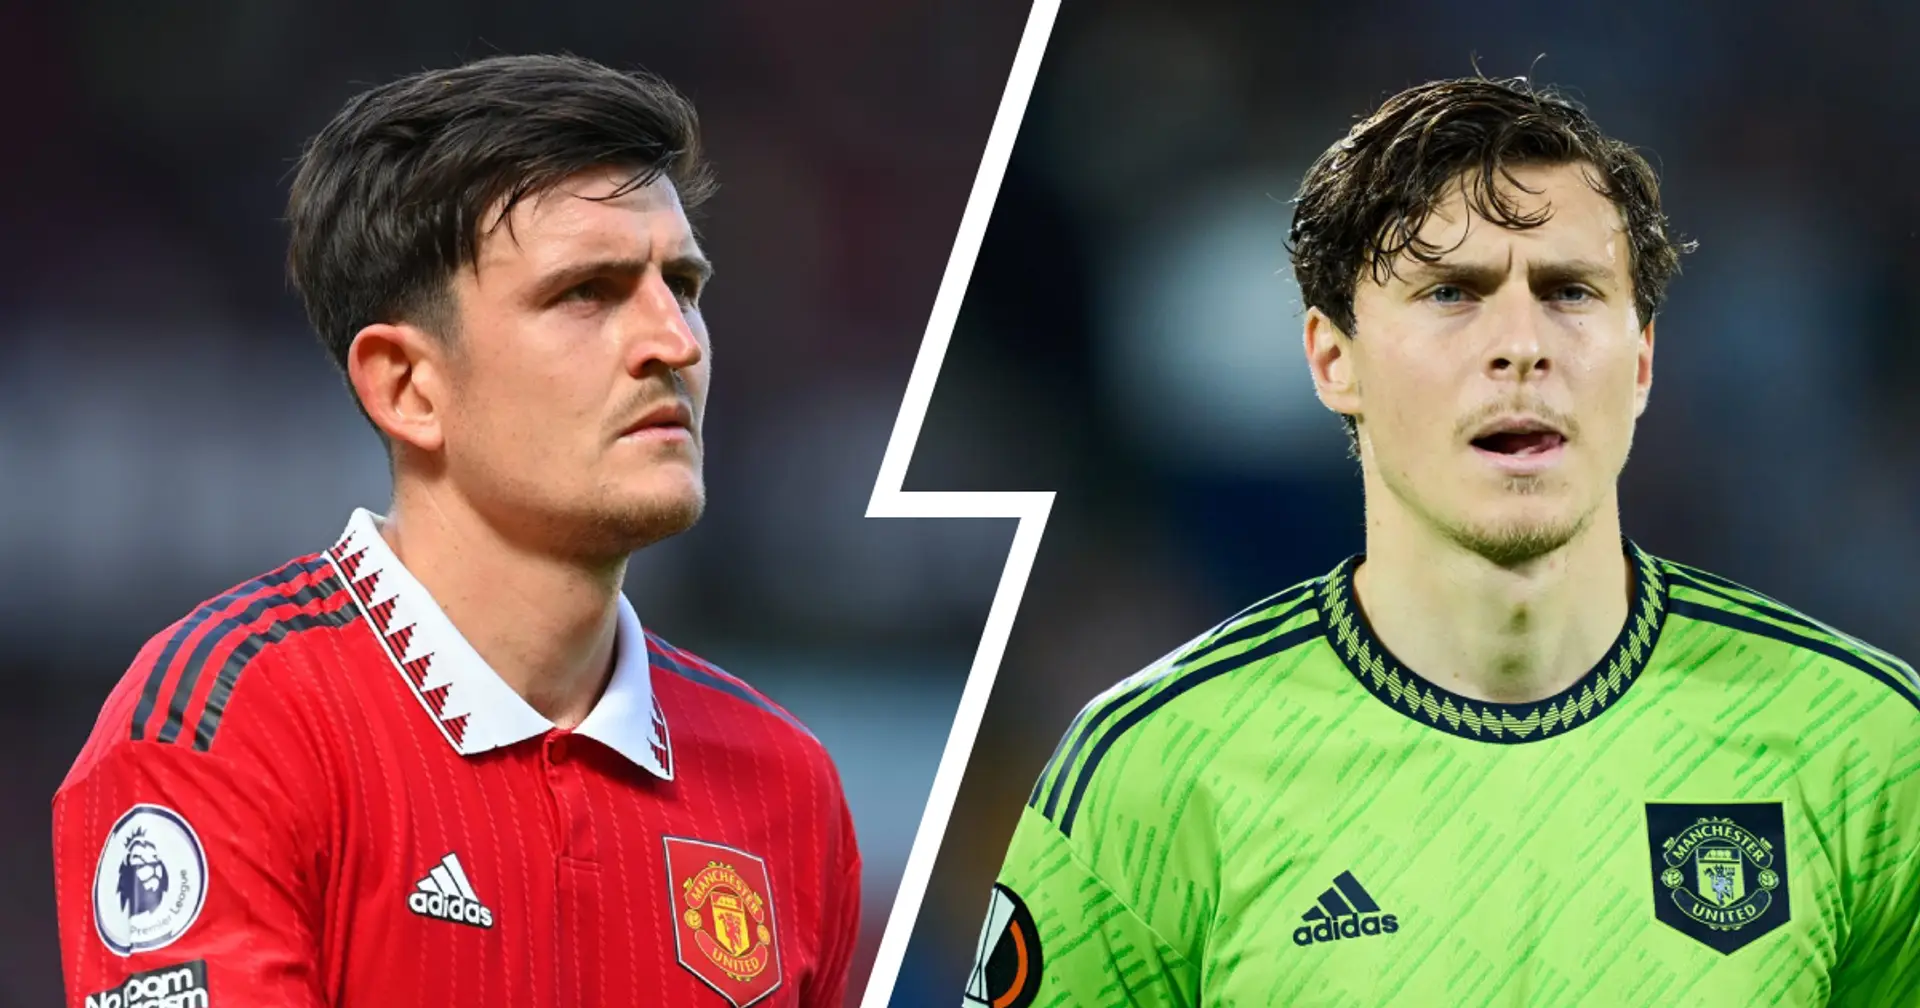 If one has to stay, should it be Maguire or Lindelof?